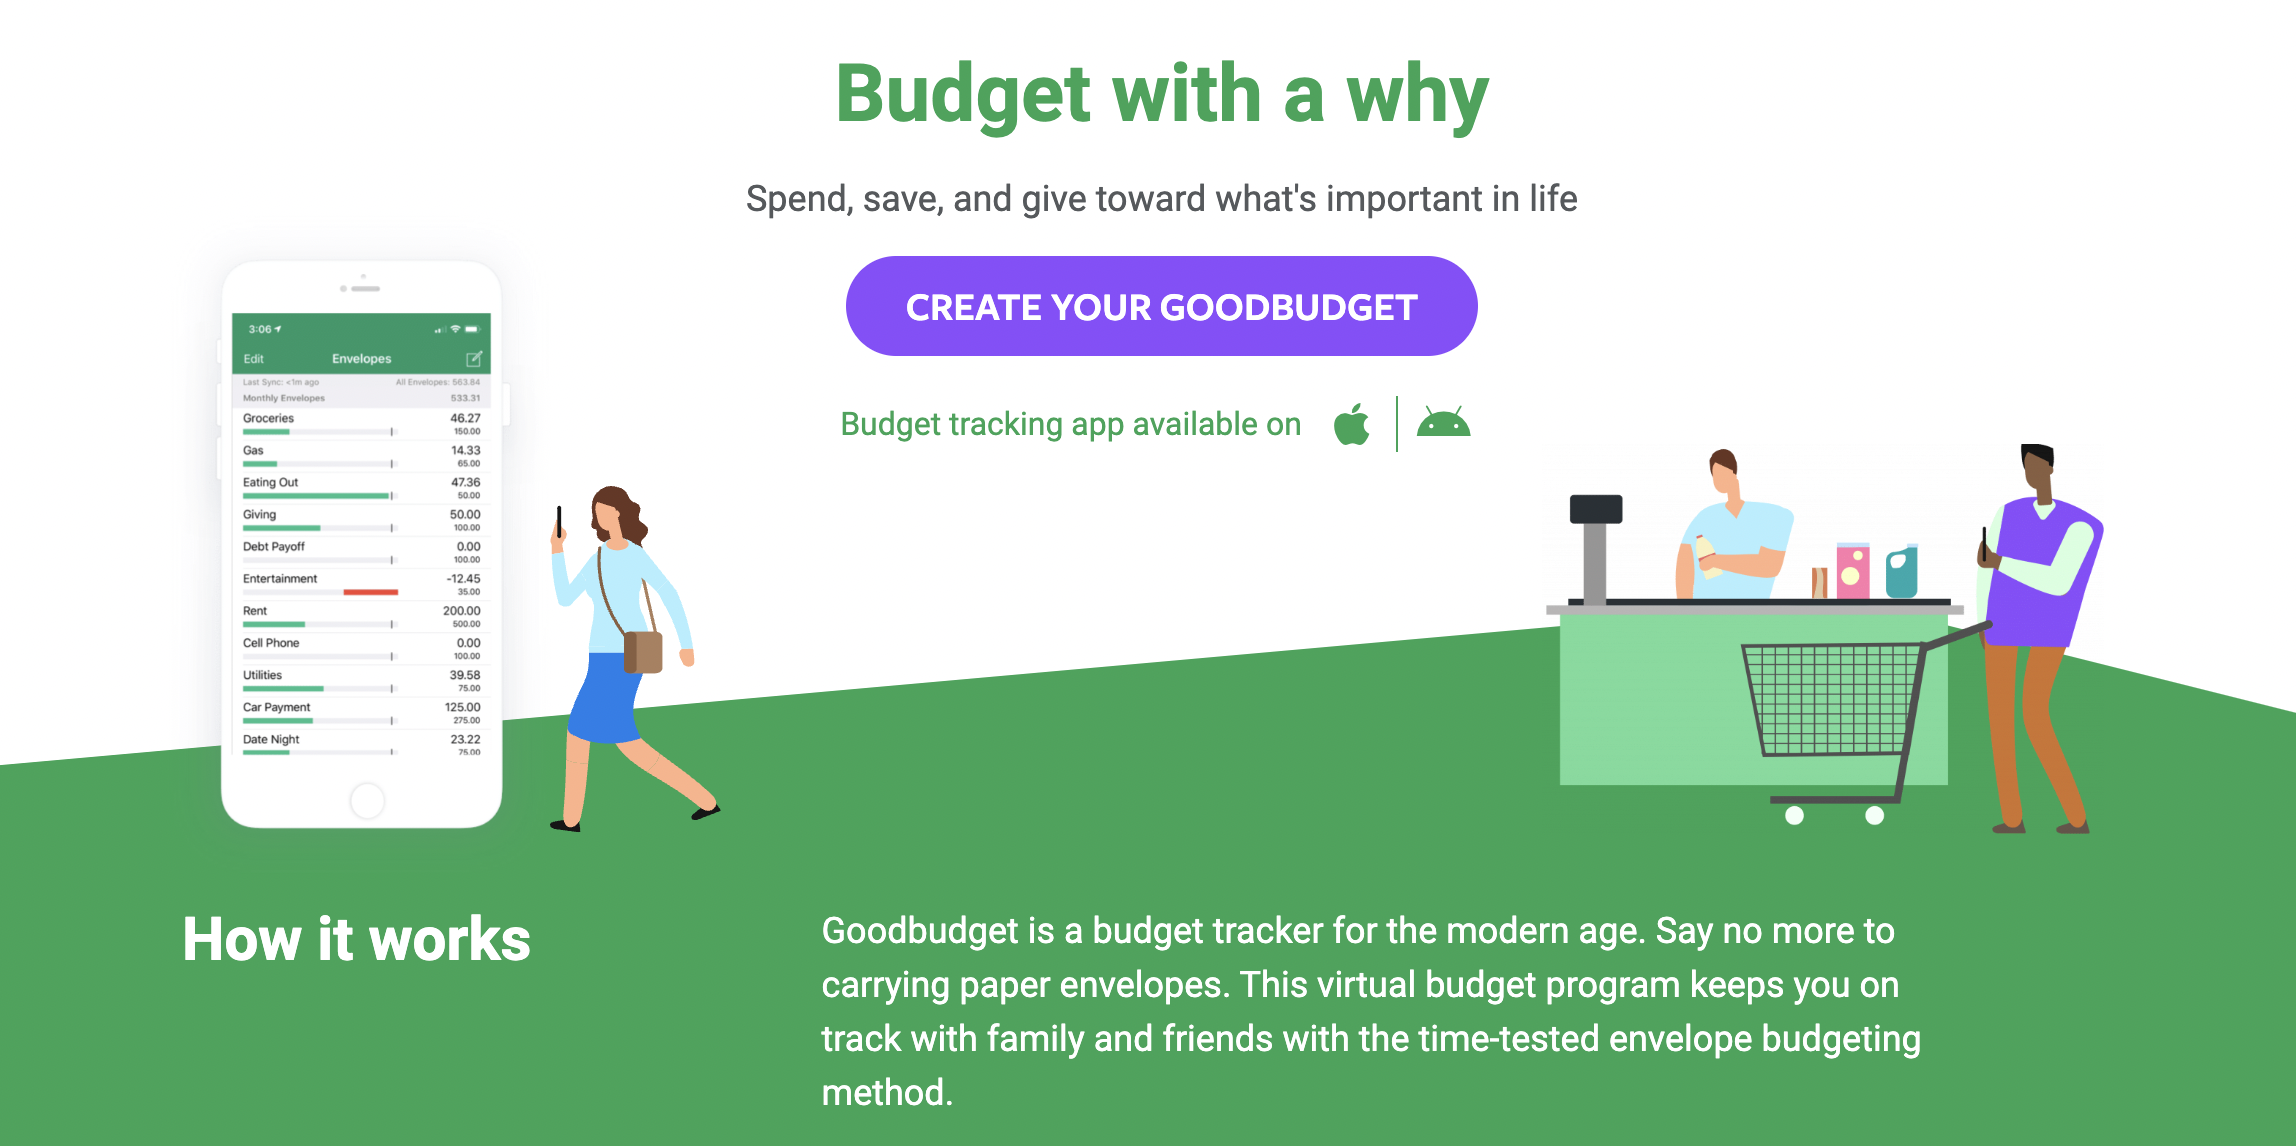 Goodbudget is a budget tracker for the modern age.